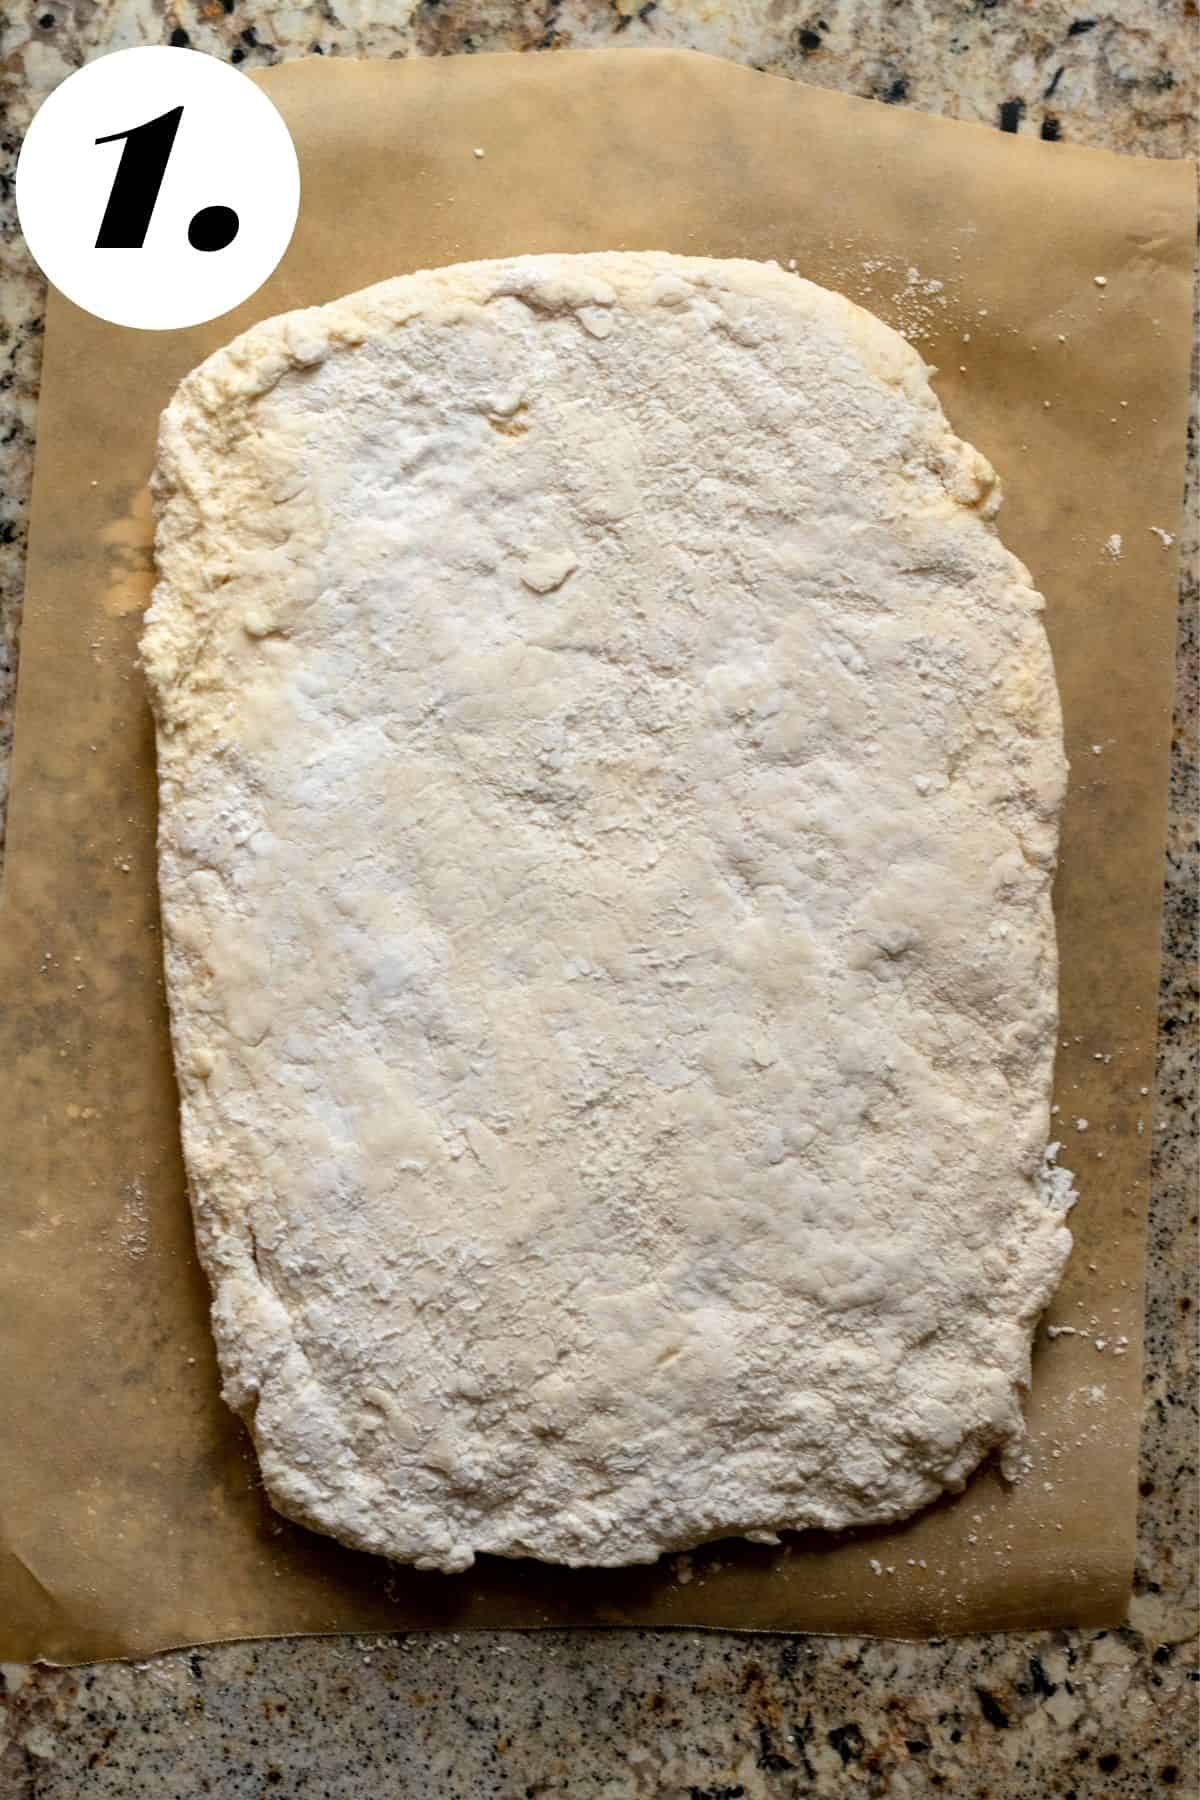 Marshmallow slab after setting on parchment paper.